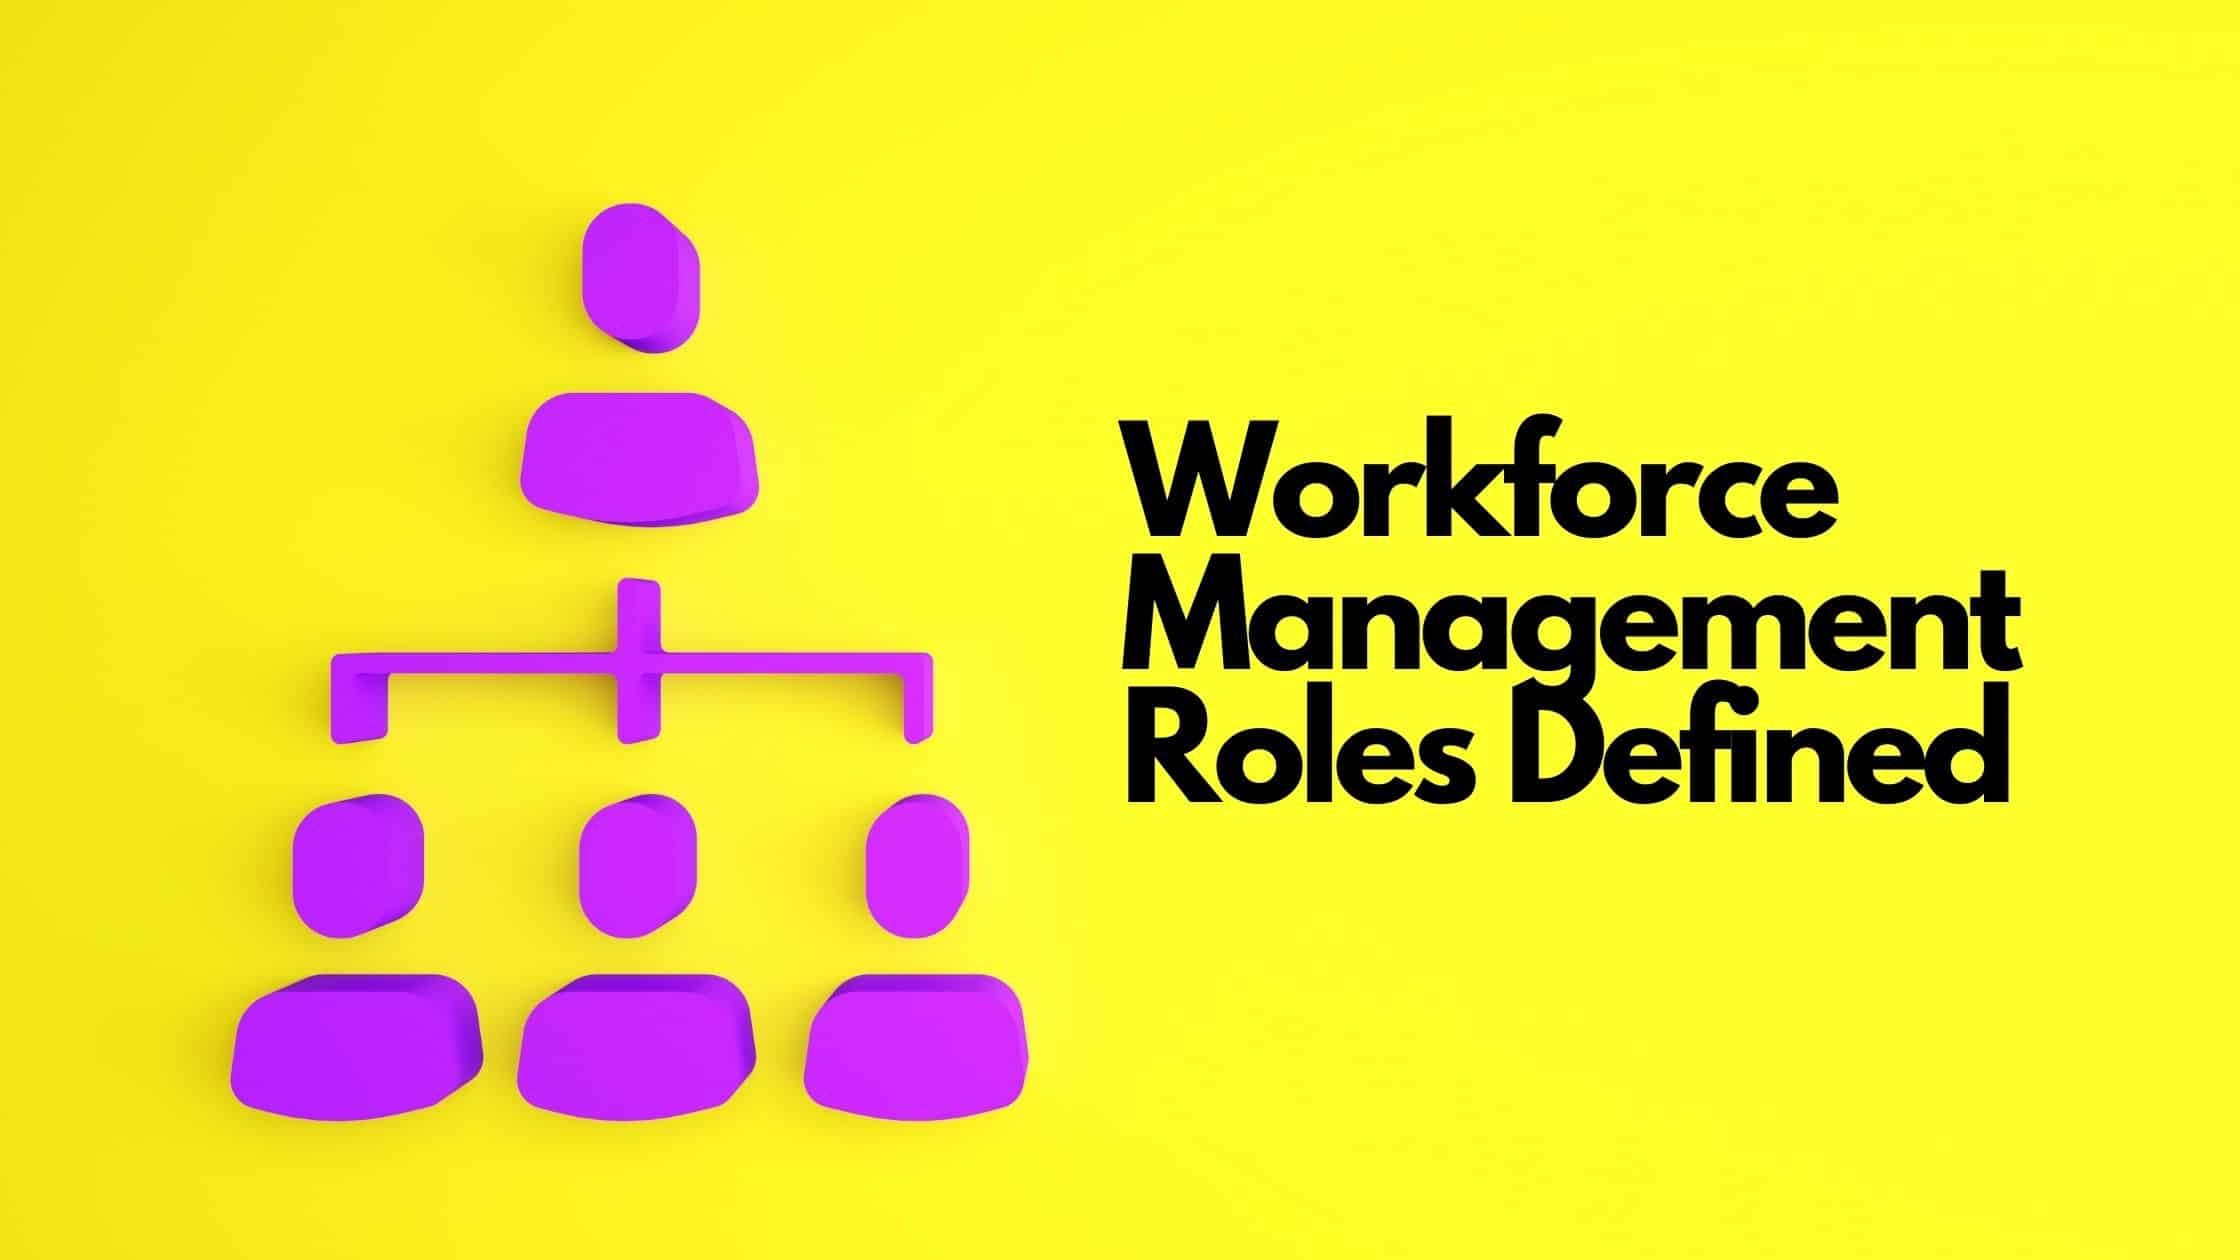 What Is a World-Class Workforce Management Department?